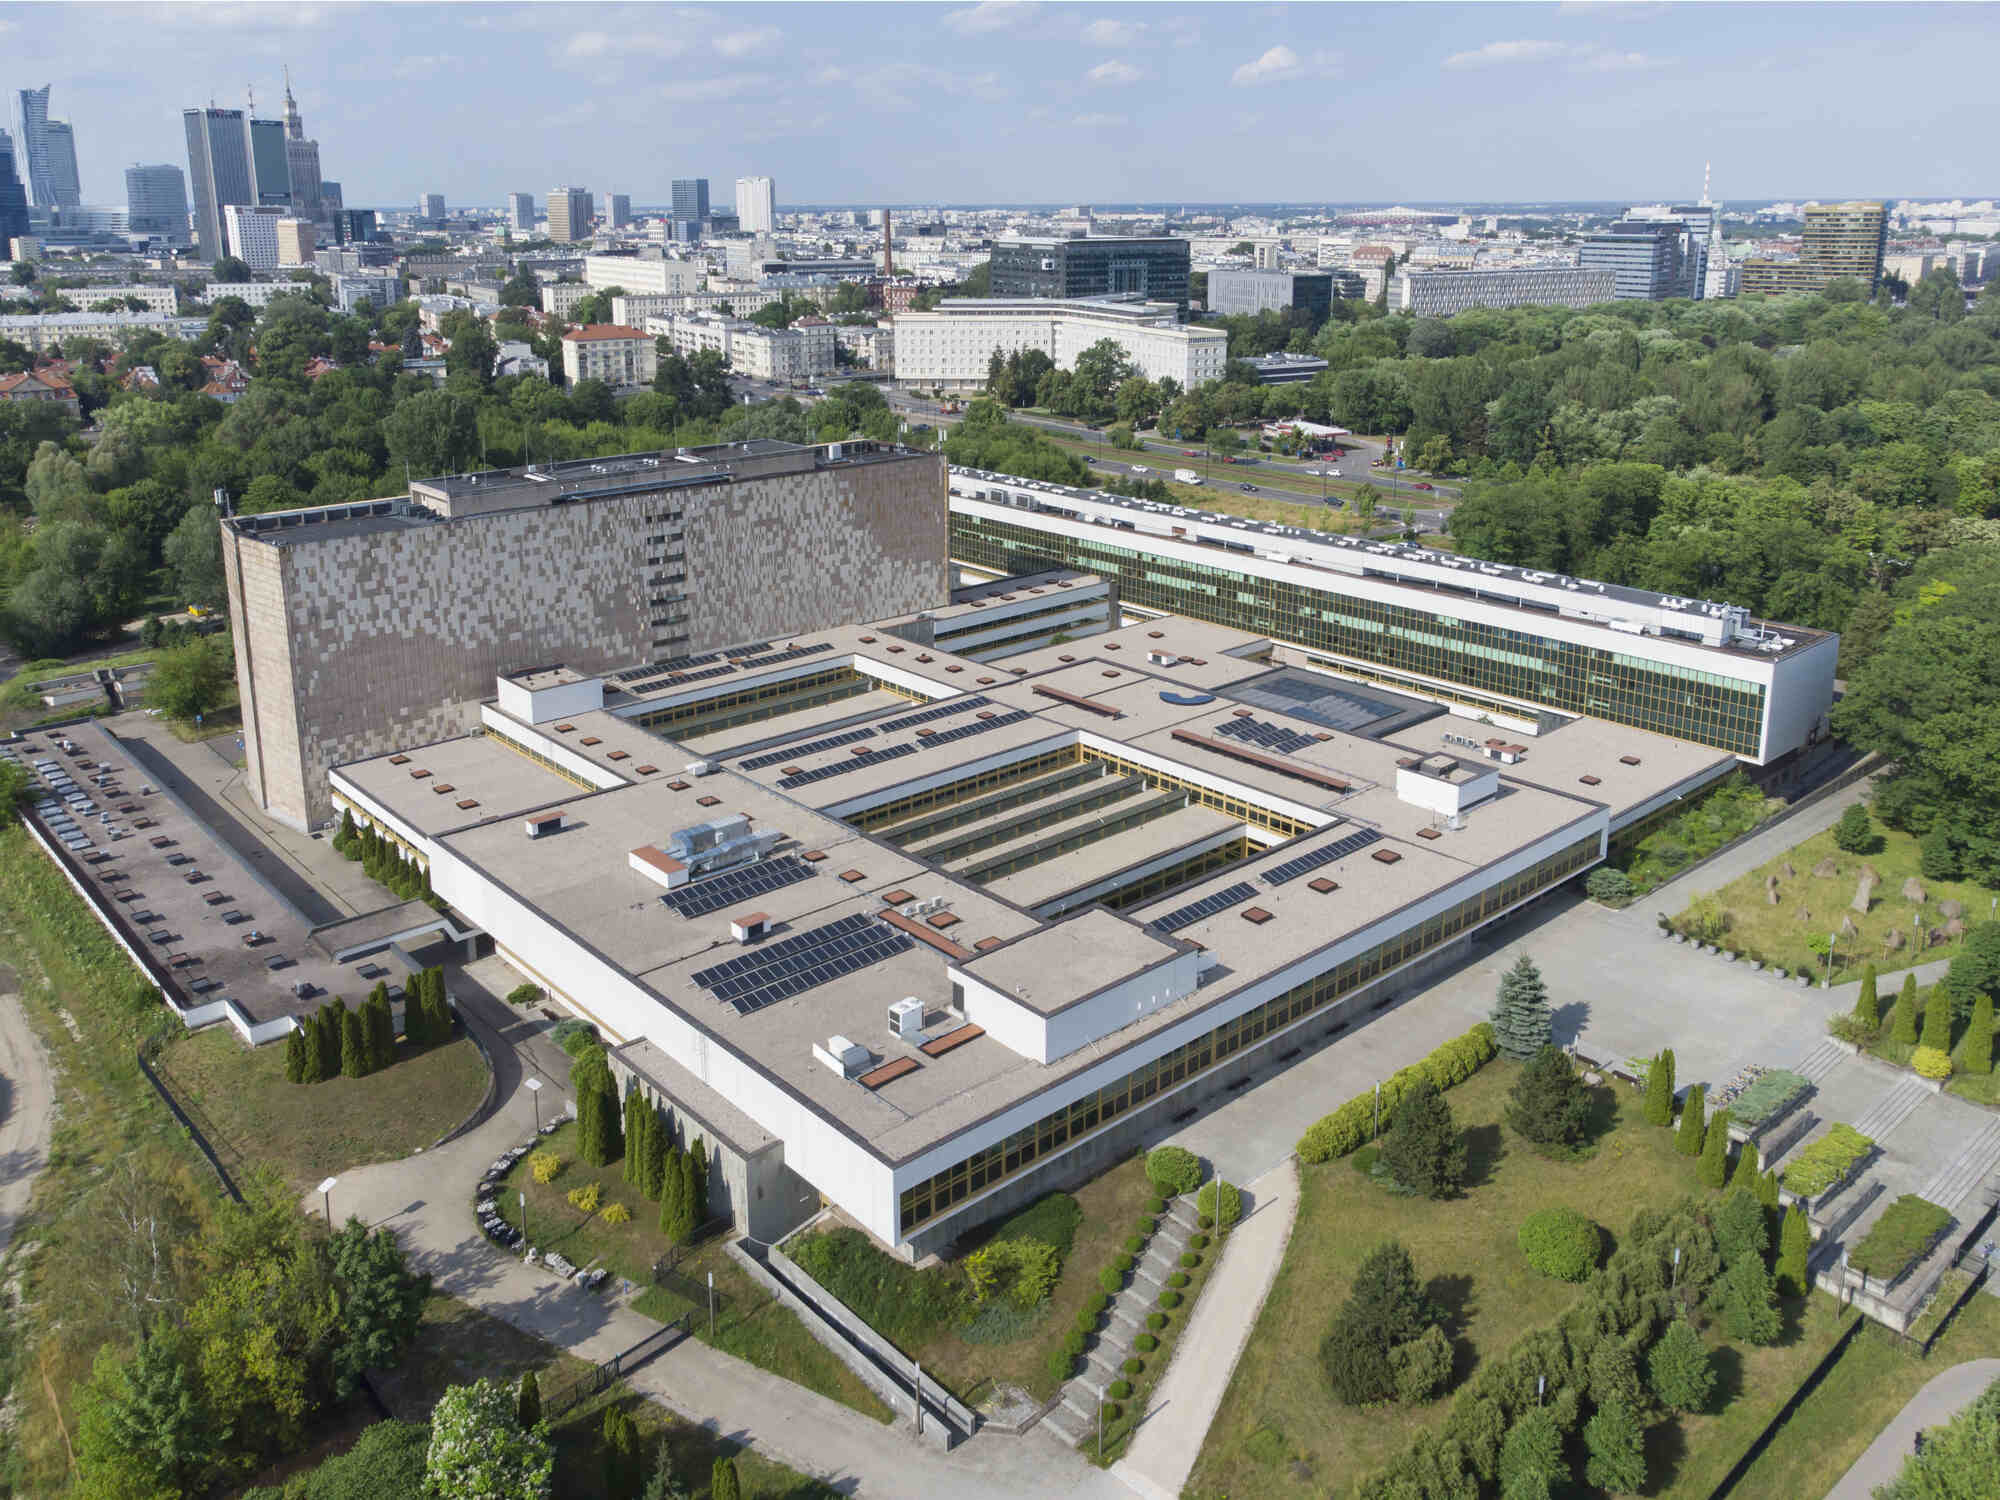 11-fascinating-facts-about-national-library-of-poland